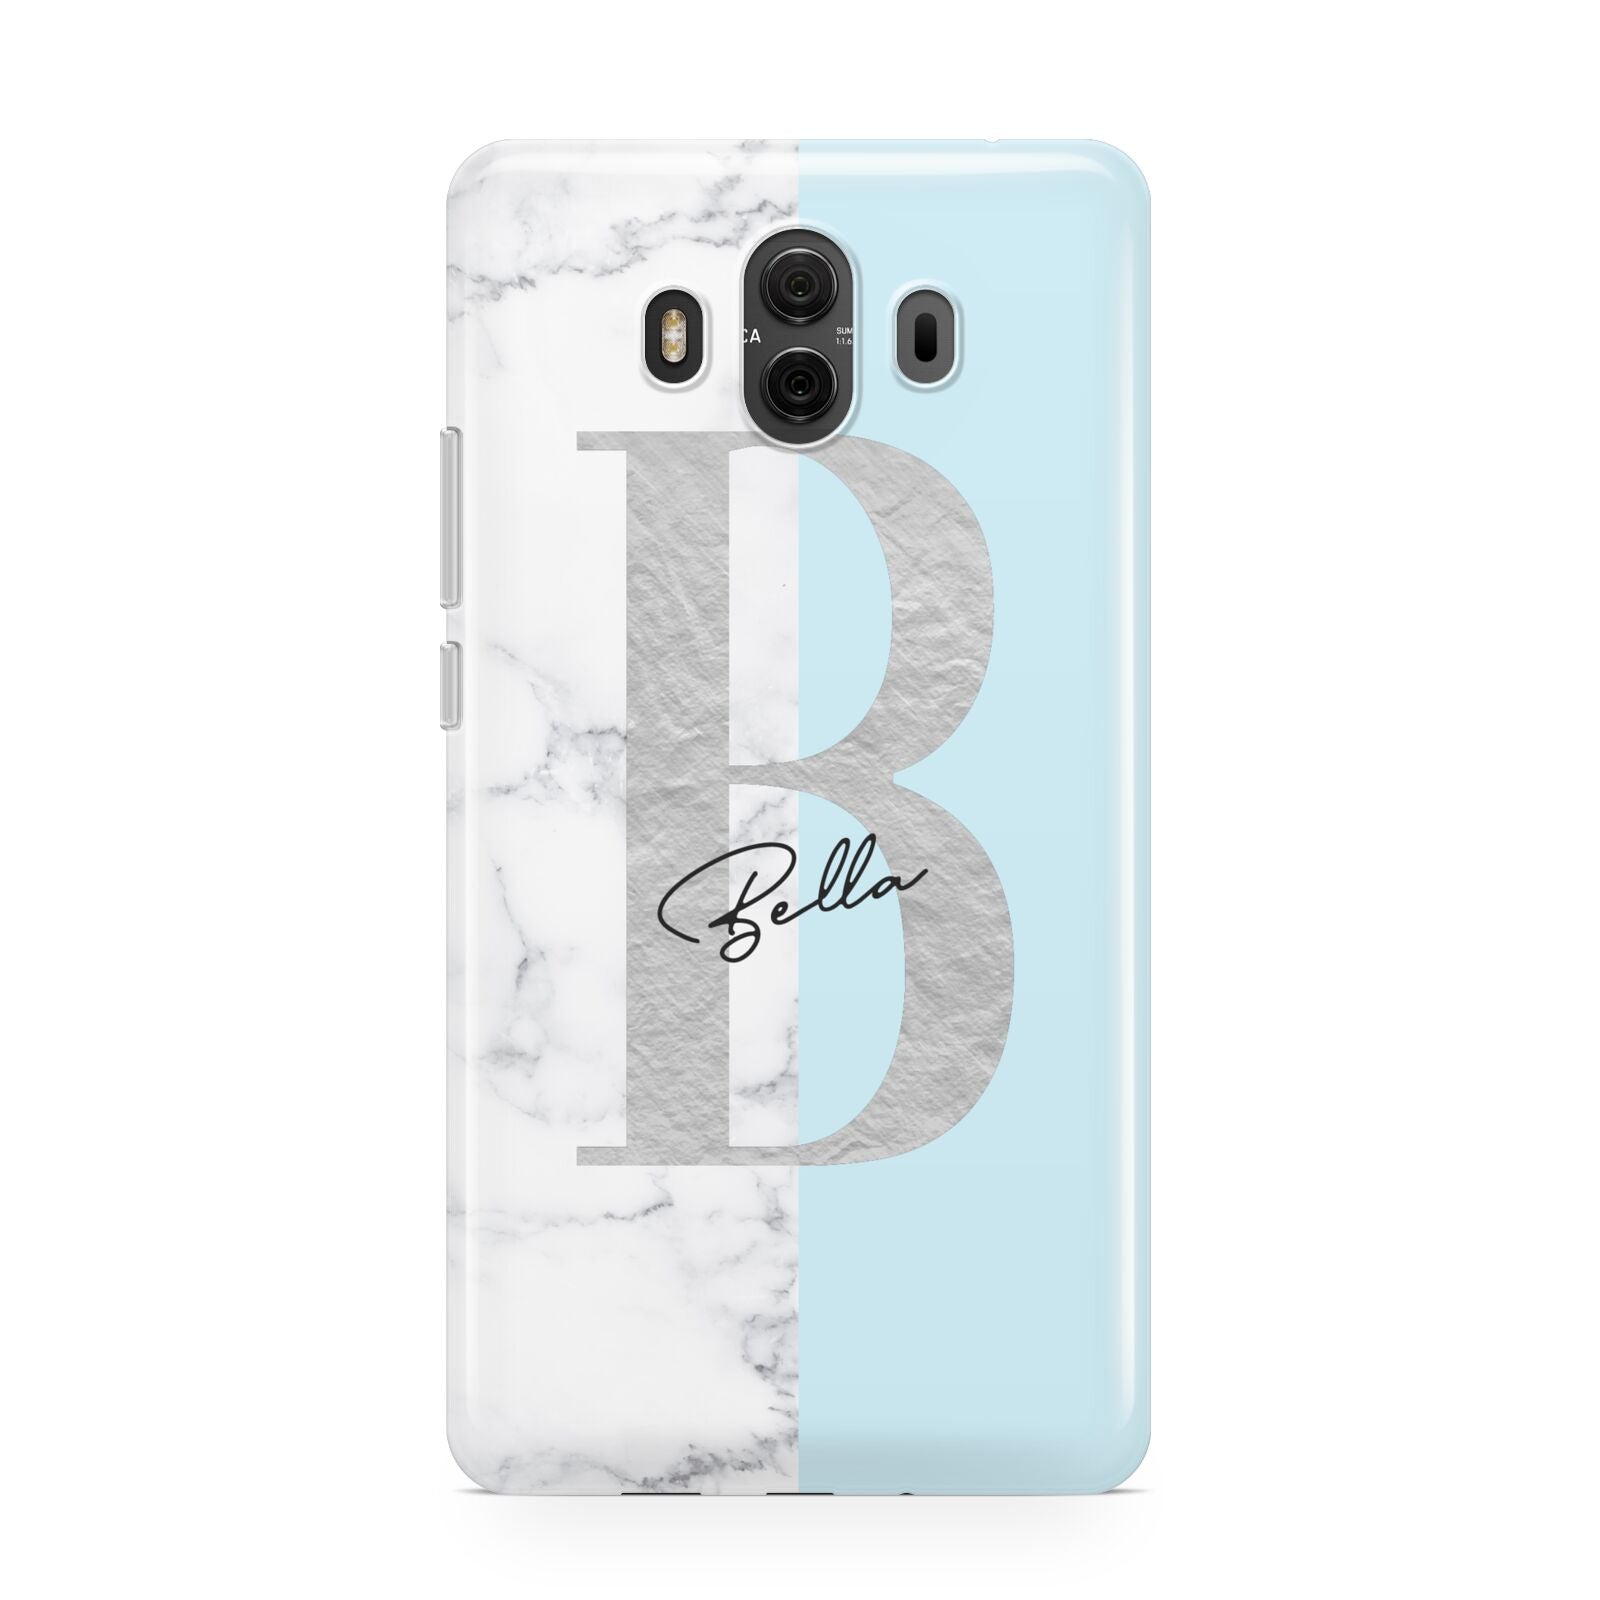 Personalised Chrome Marble Huawei Mate 10 Protective Phone Case